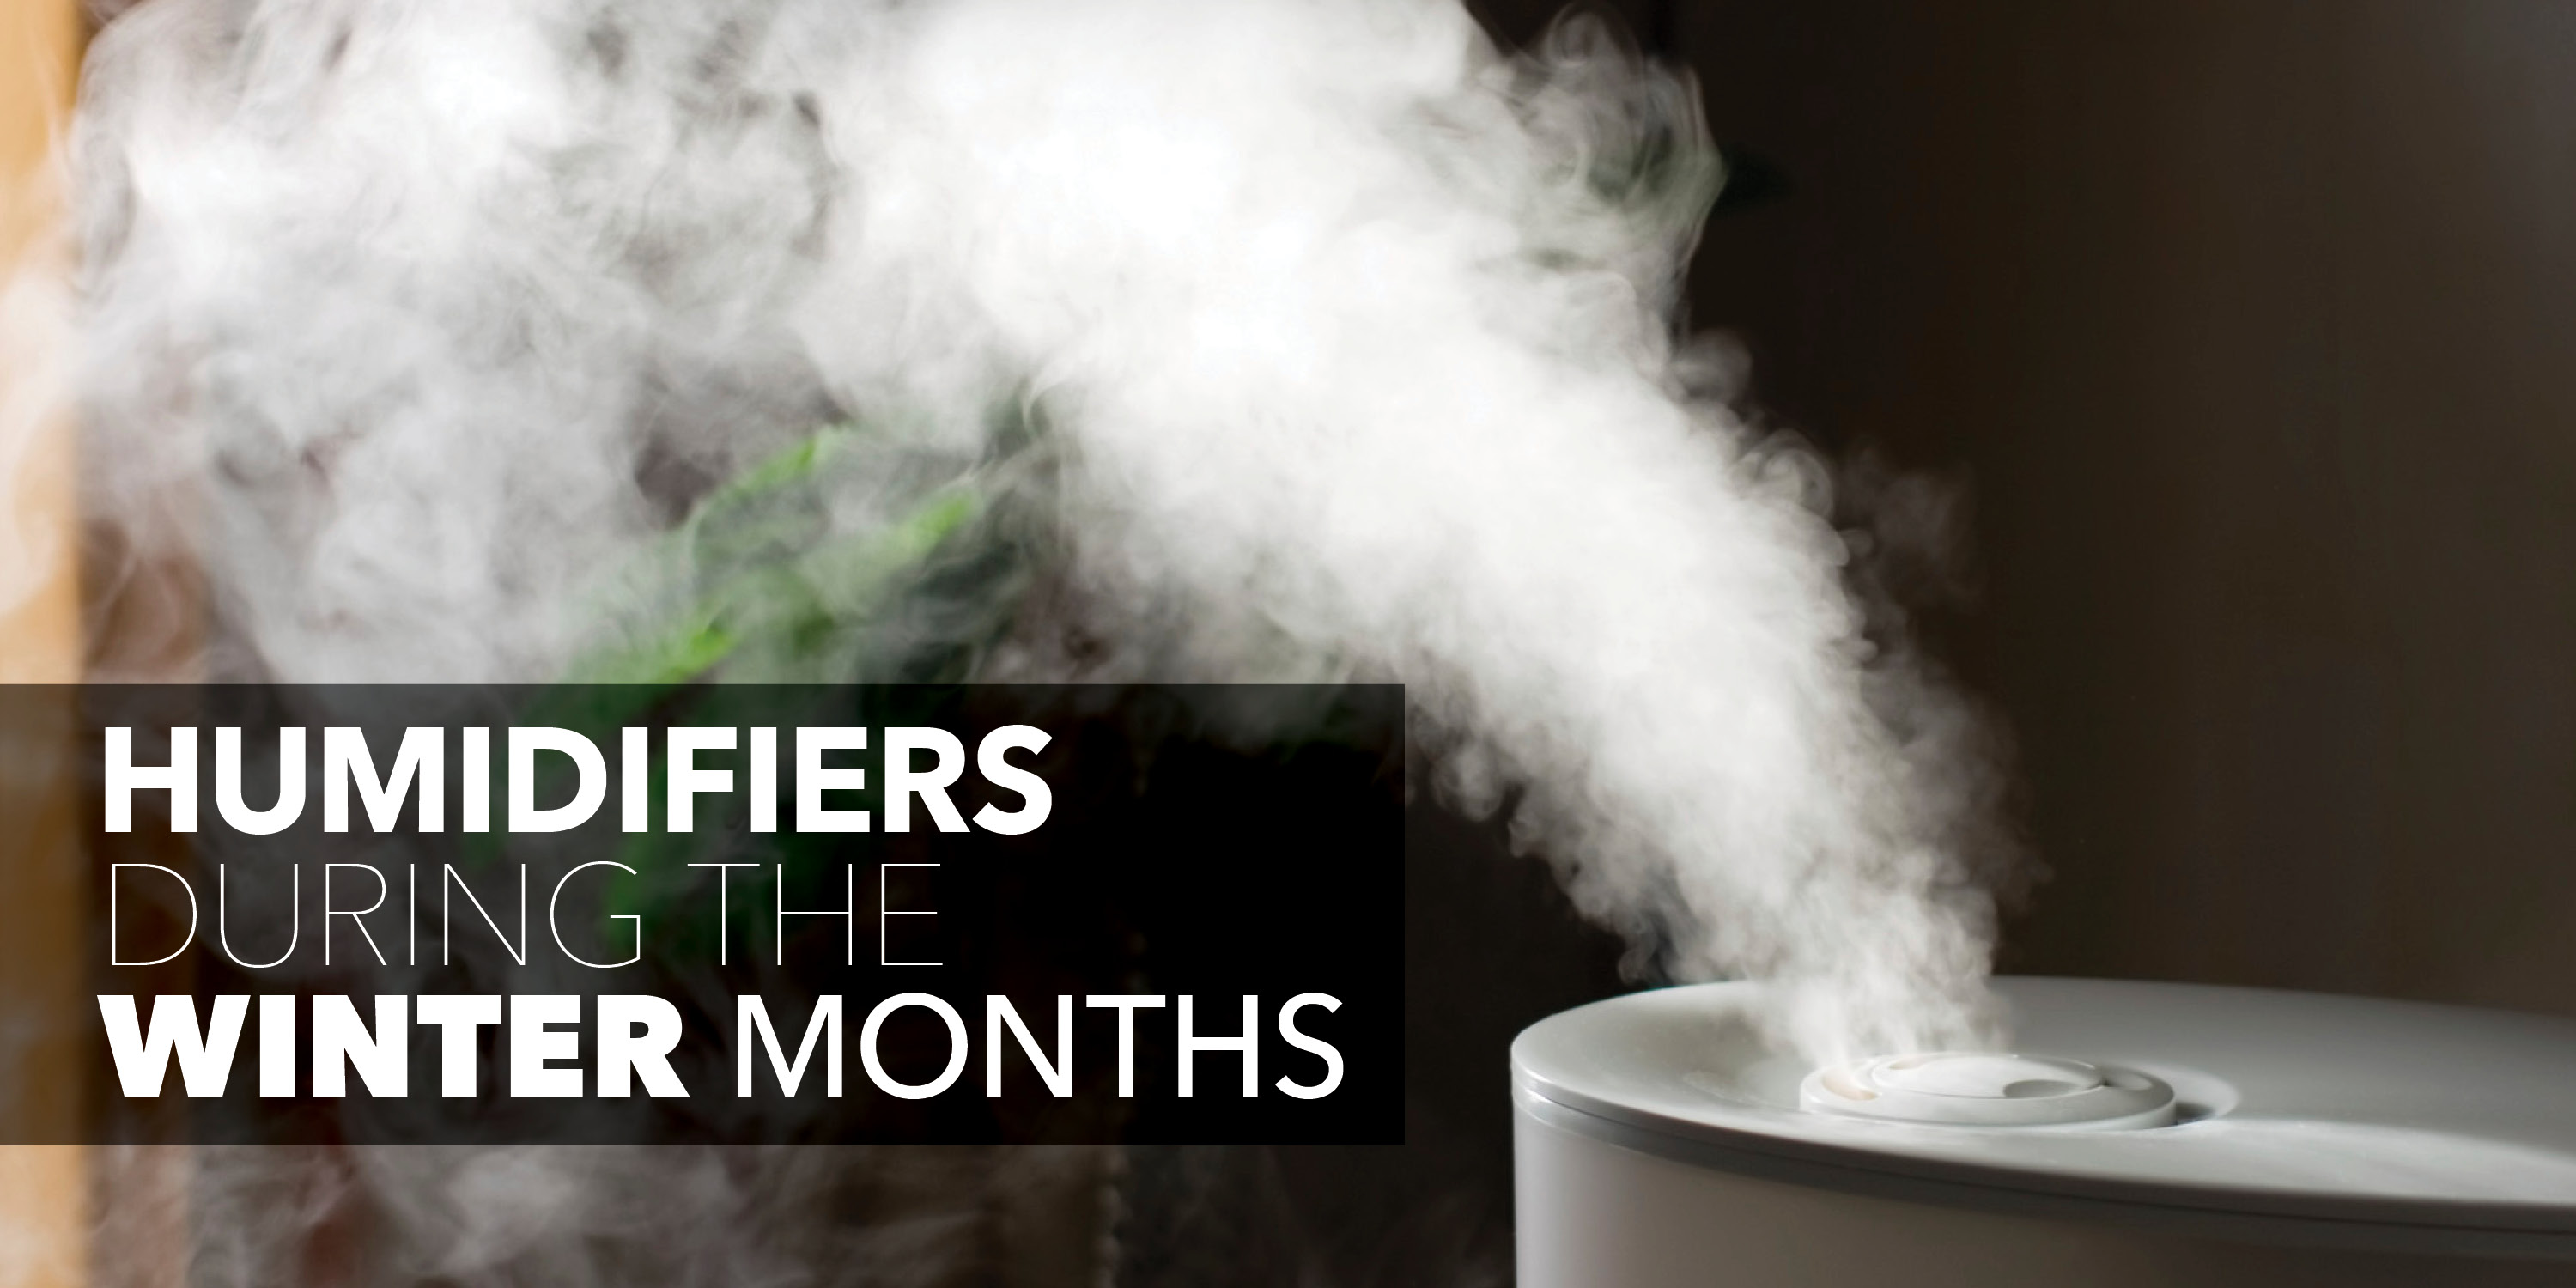 Humidifier with text: "humidifiers during the winter months"